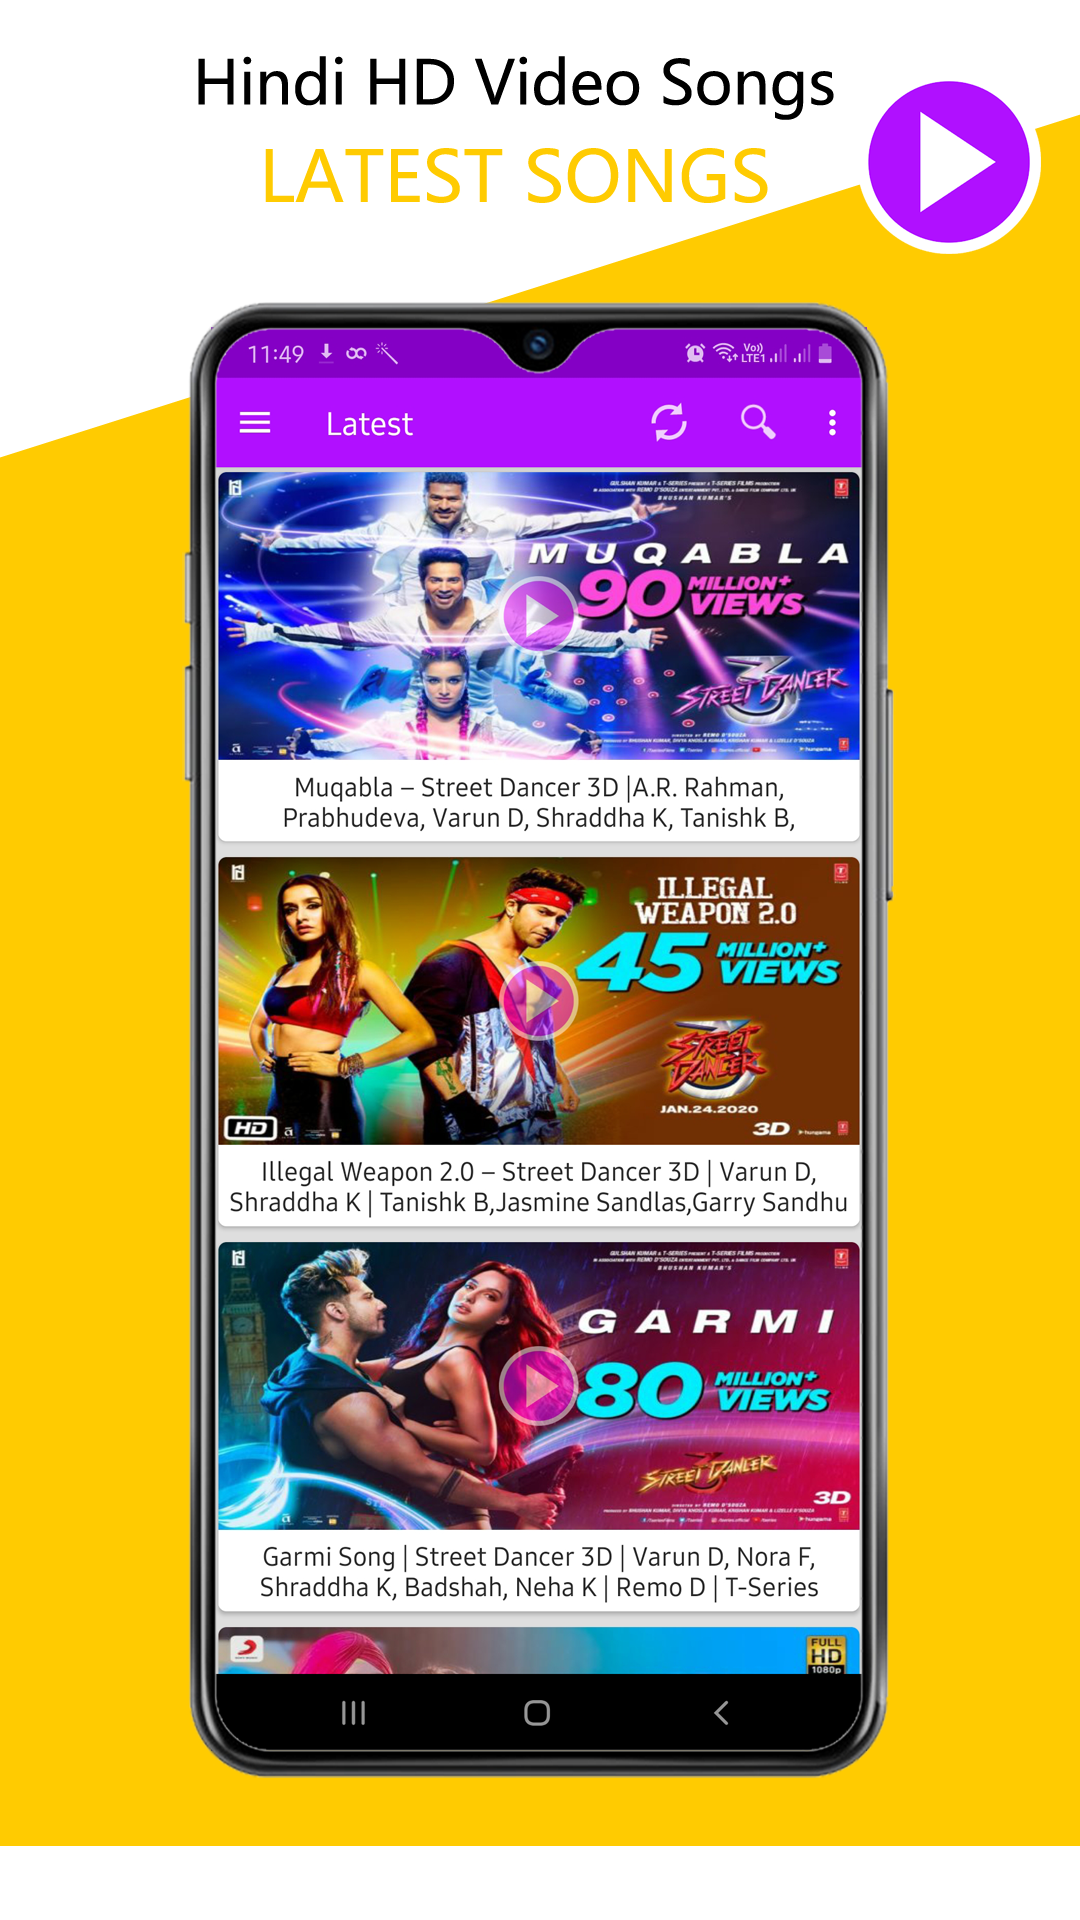 Hindi HD Video Songs APK 9.6 for Android – Download Hindi HD Video Songs  XAPK (APK Bundle) Latest Version from APKFab.com